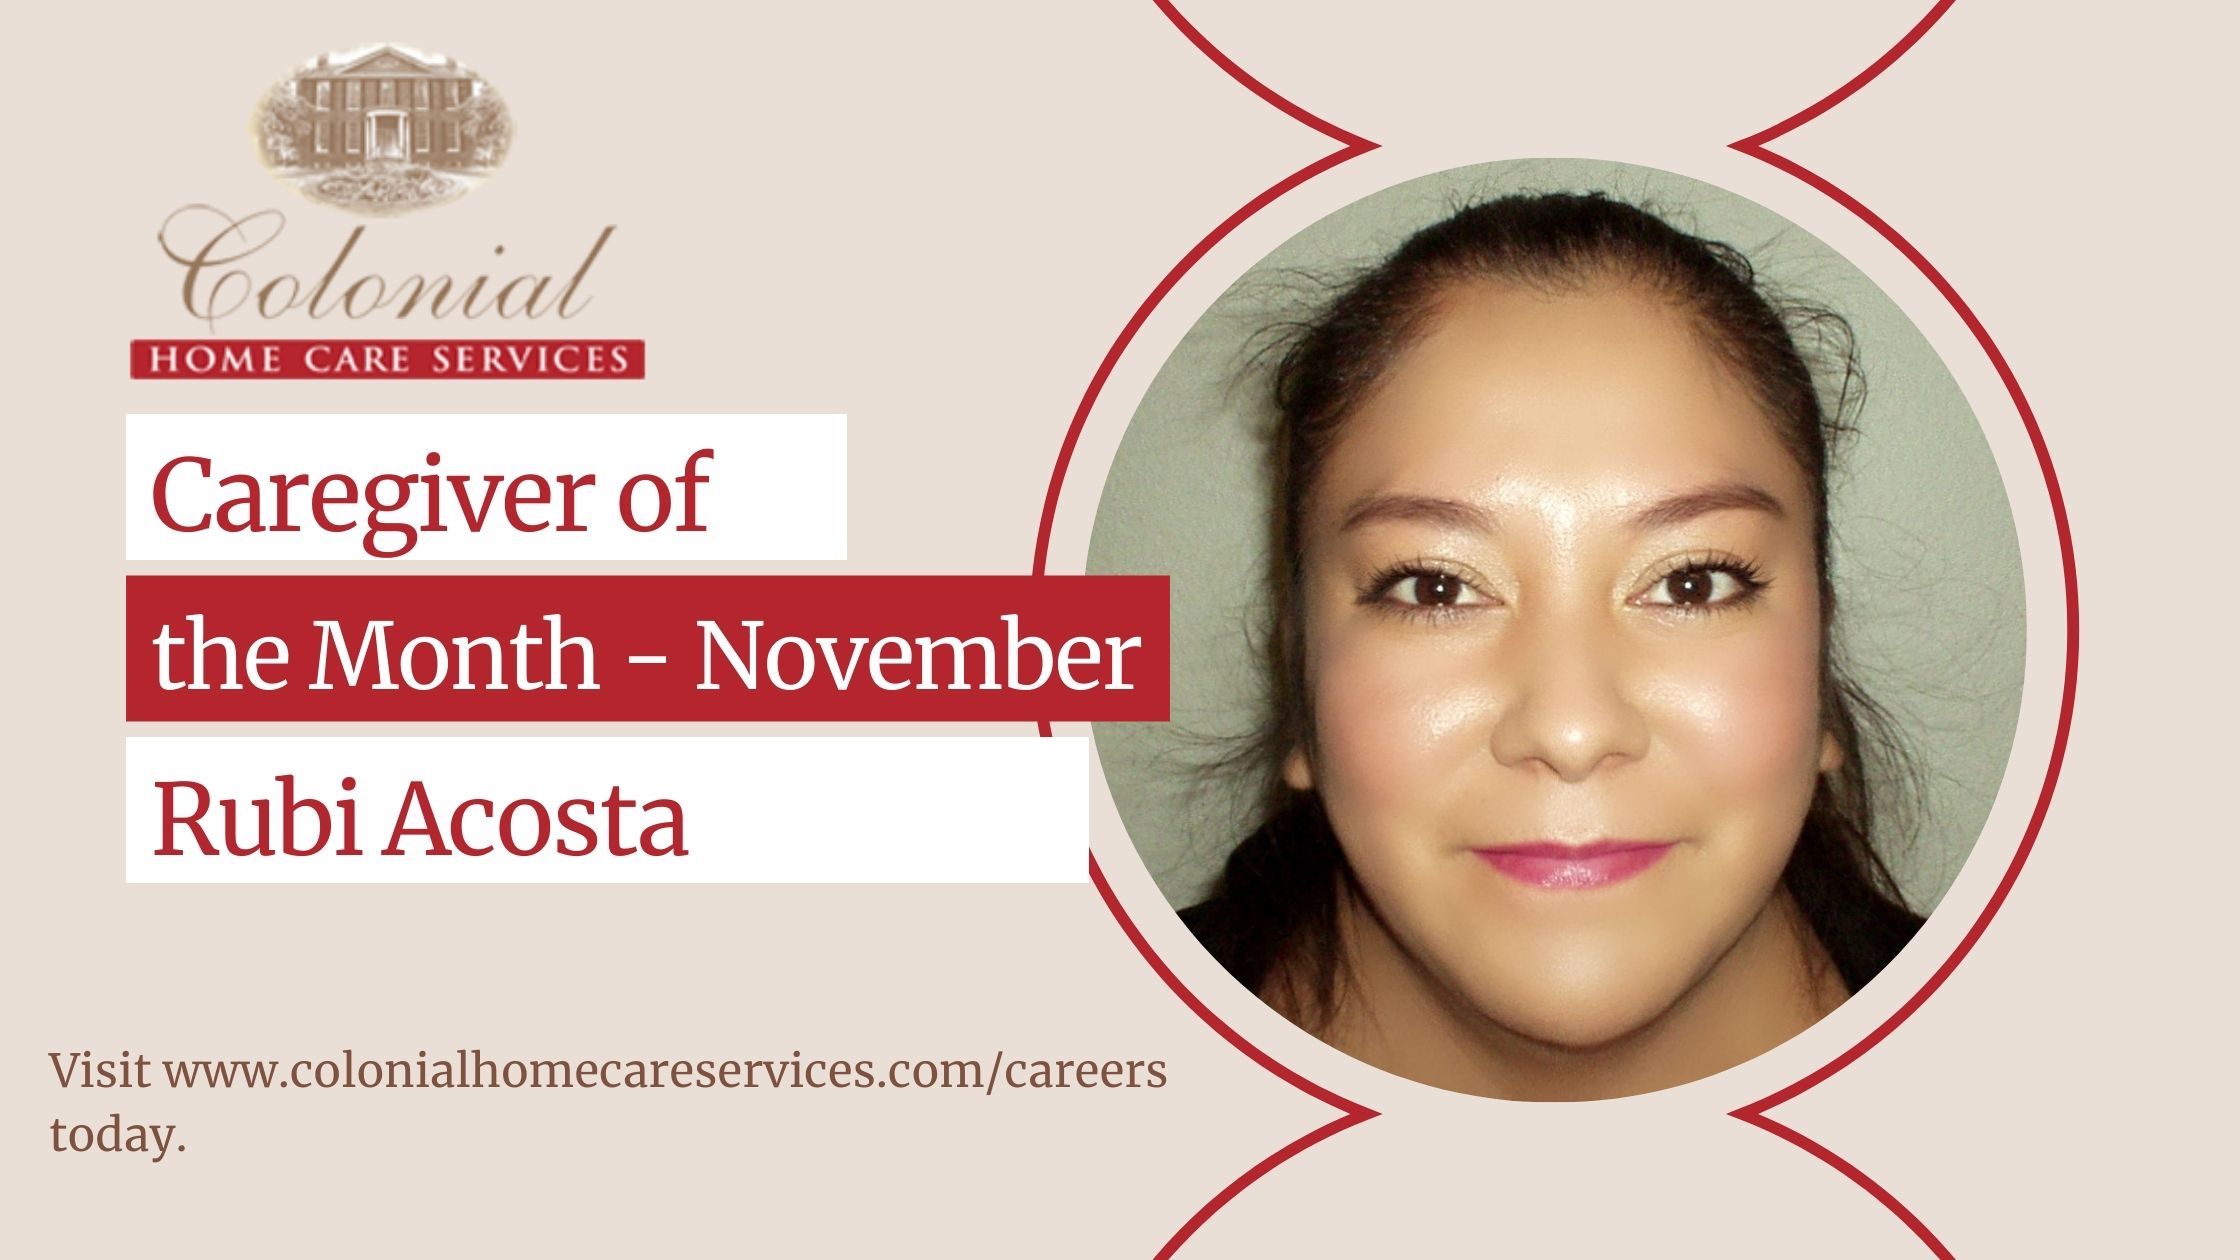 Our Caregiver of the Month for November 2021, Rubi Acosta